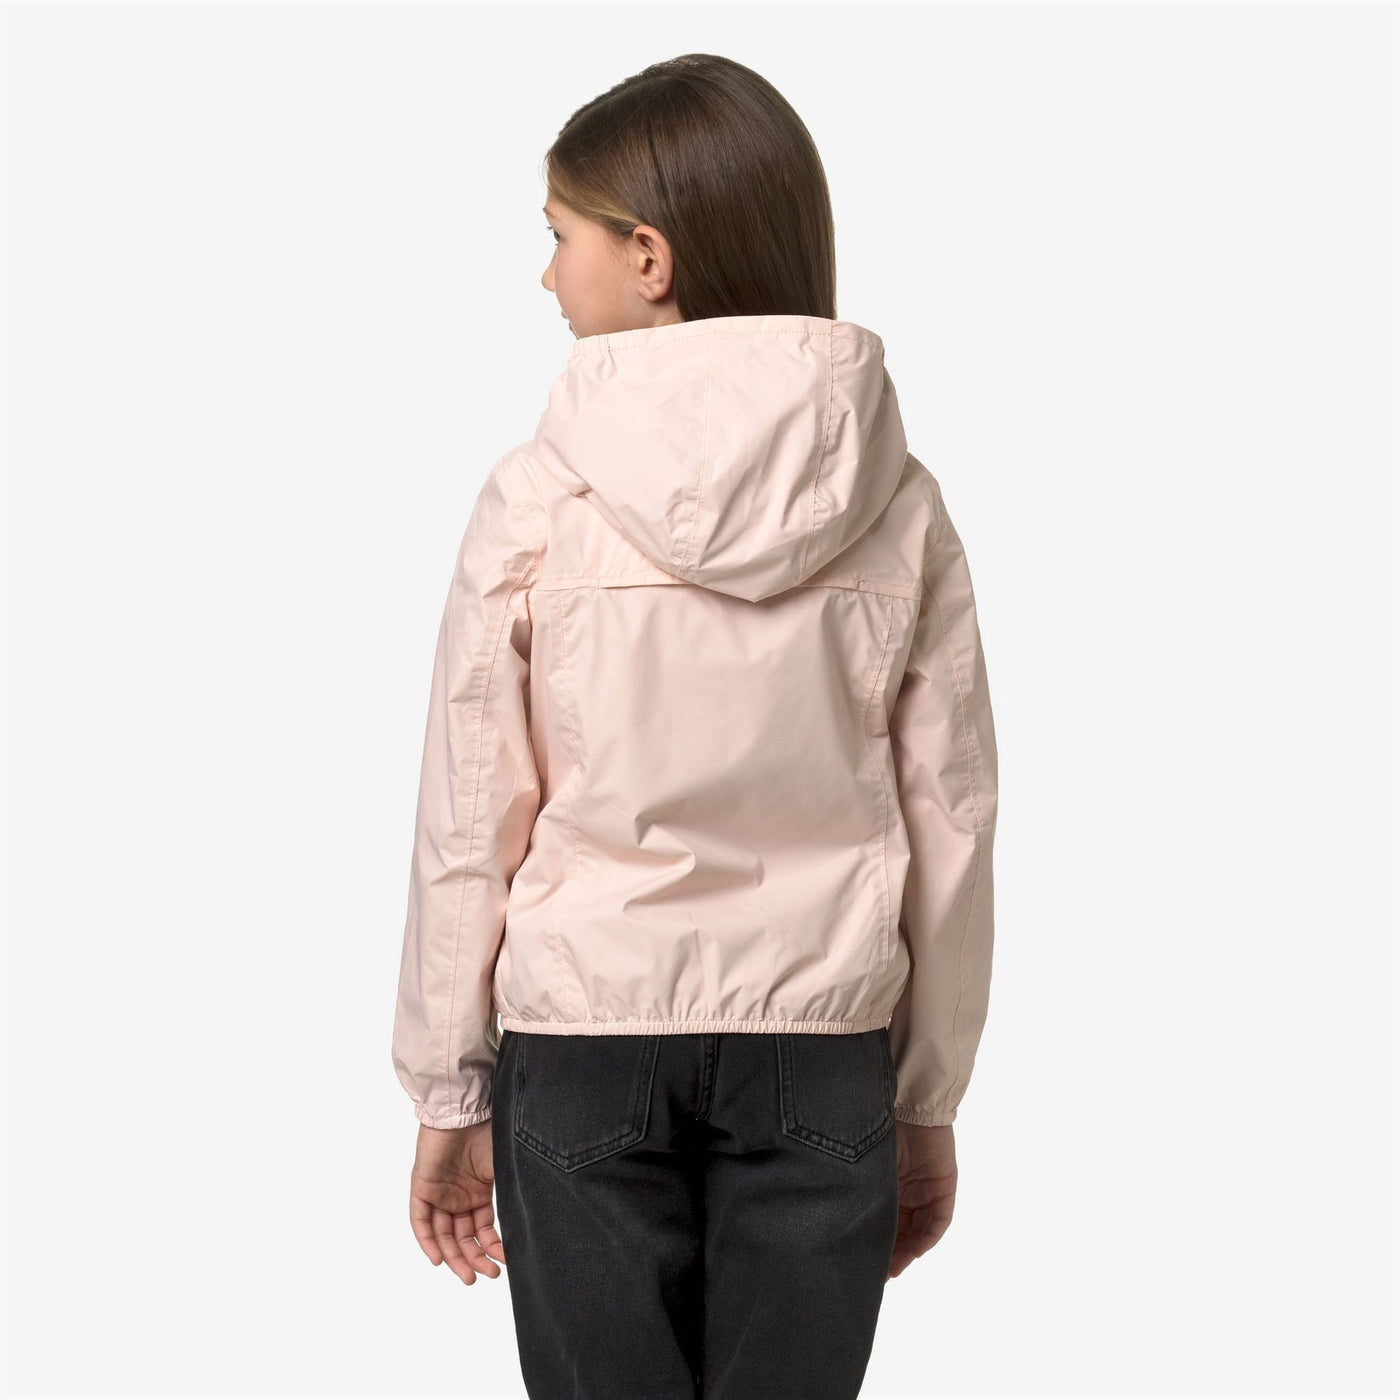 P. LILY ECO PLUS DOUBLE - JACKET - KID UNISEX - PINK RED